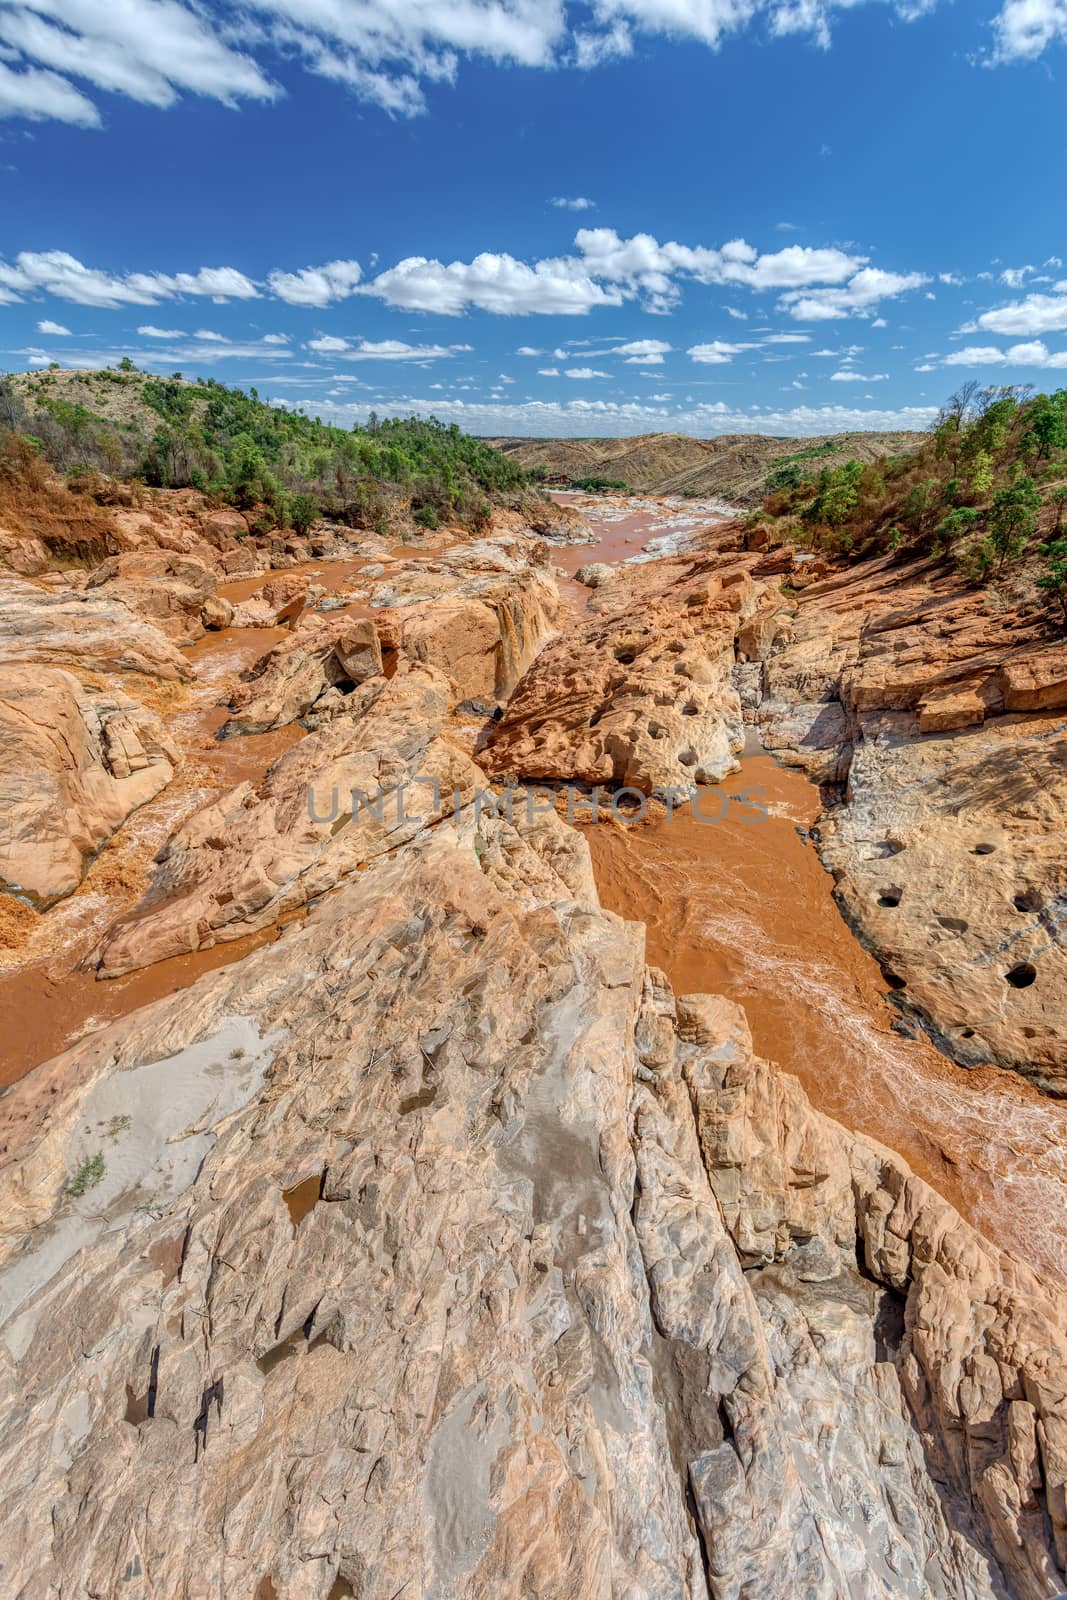 rocky river bed Betsiboka river after heavy rain, red yellow water stream, landscape with blue sky, northern Madagascar landscape, Africa wilderness